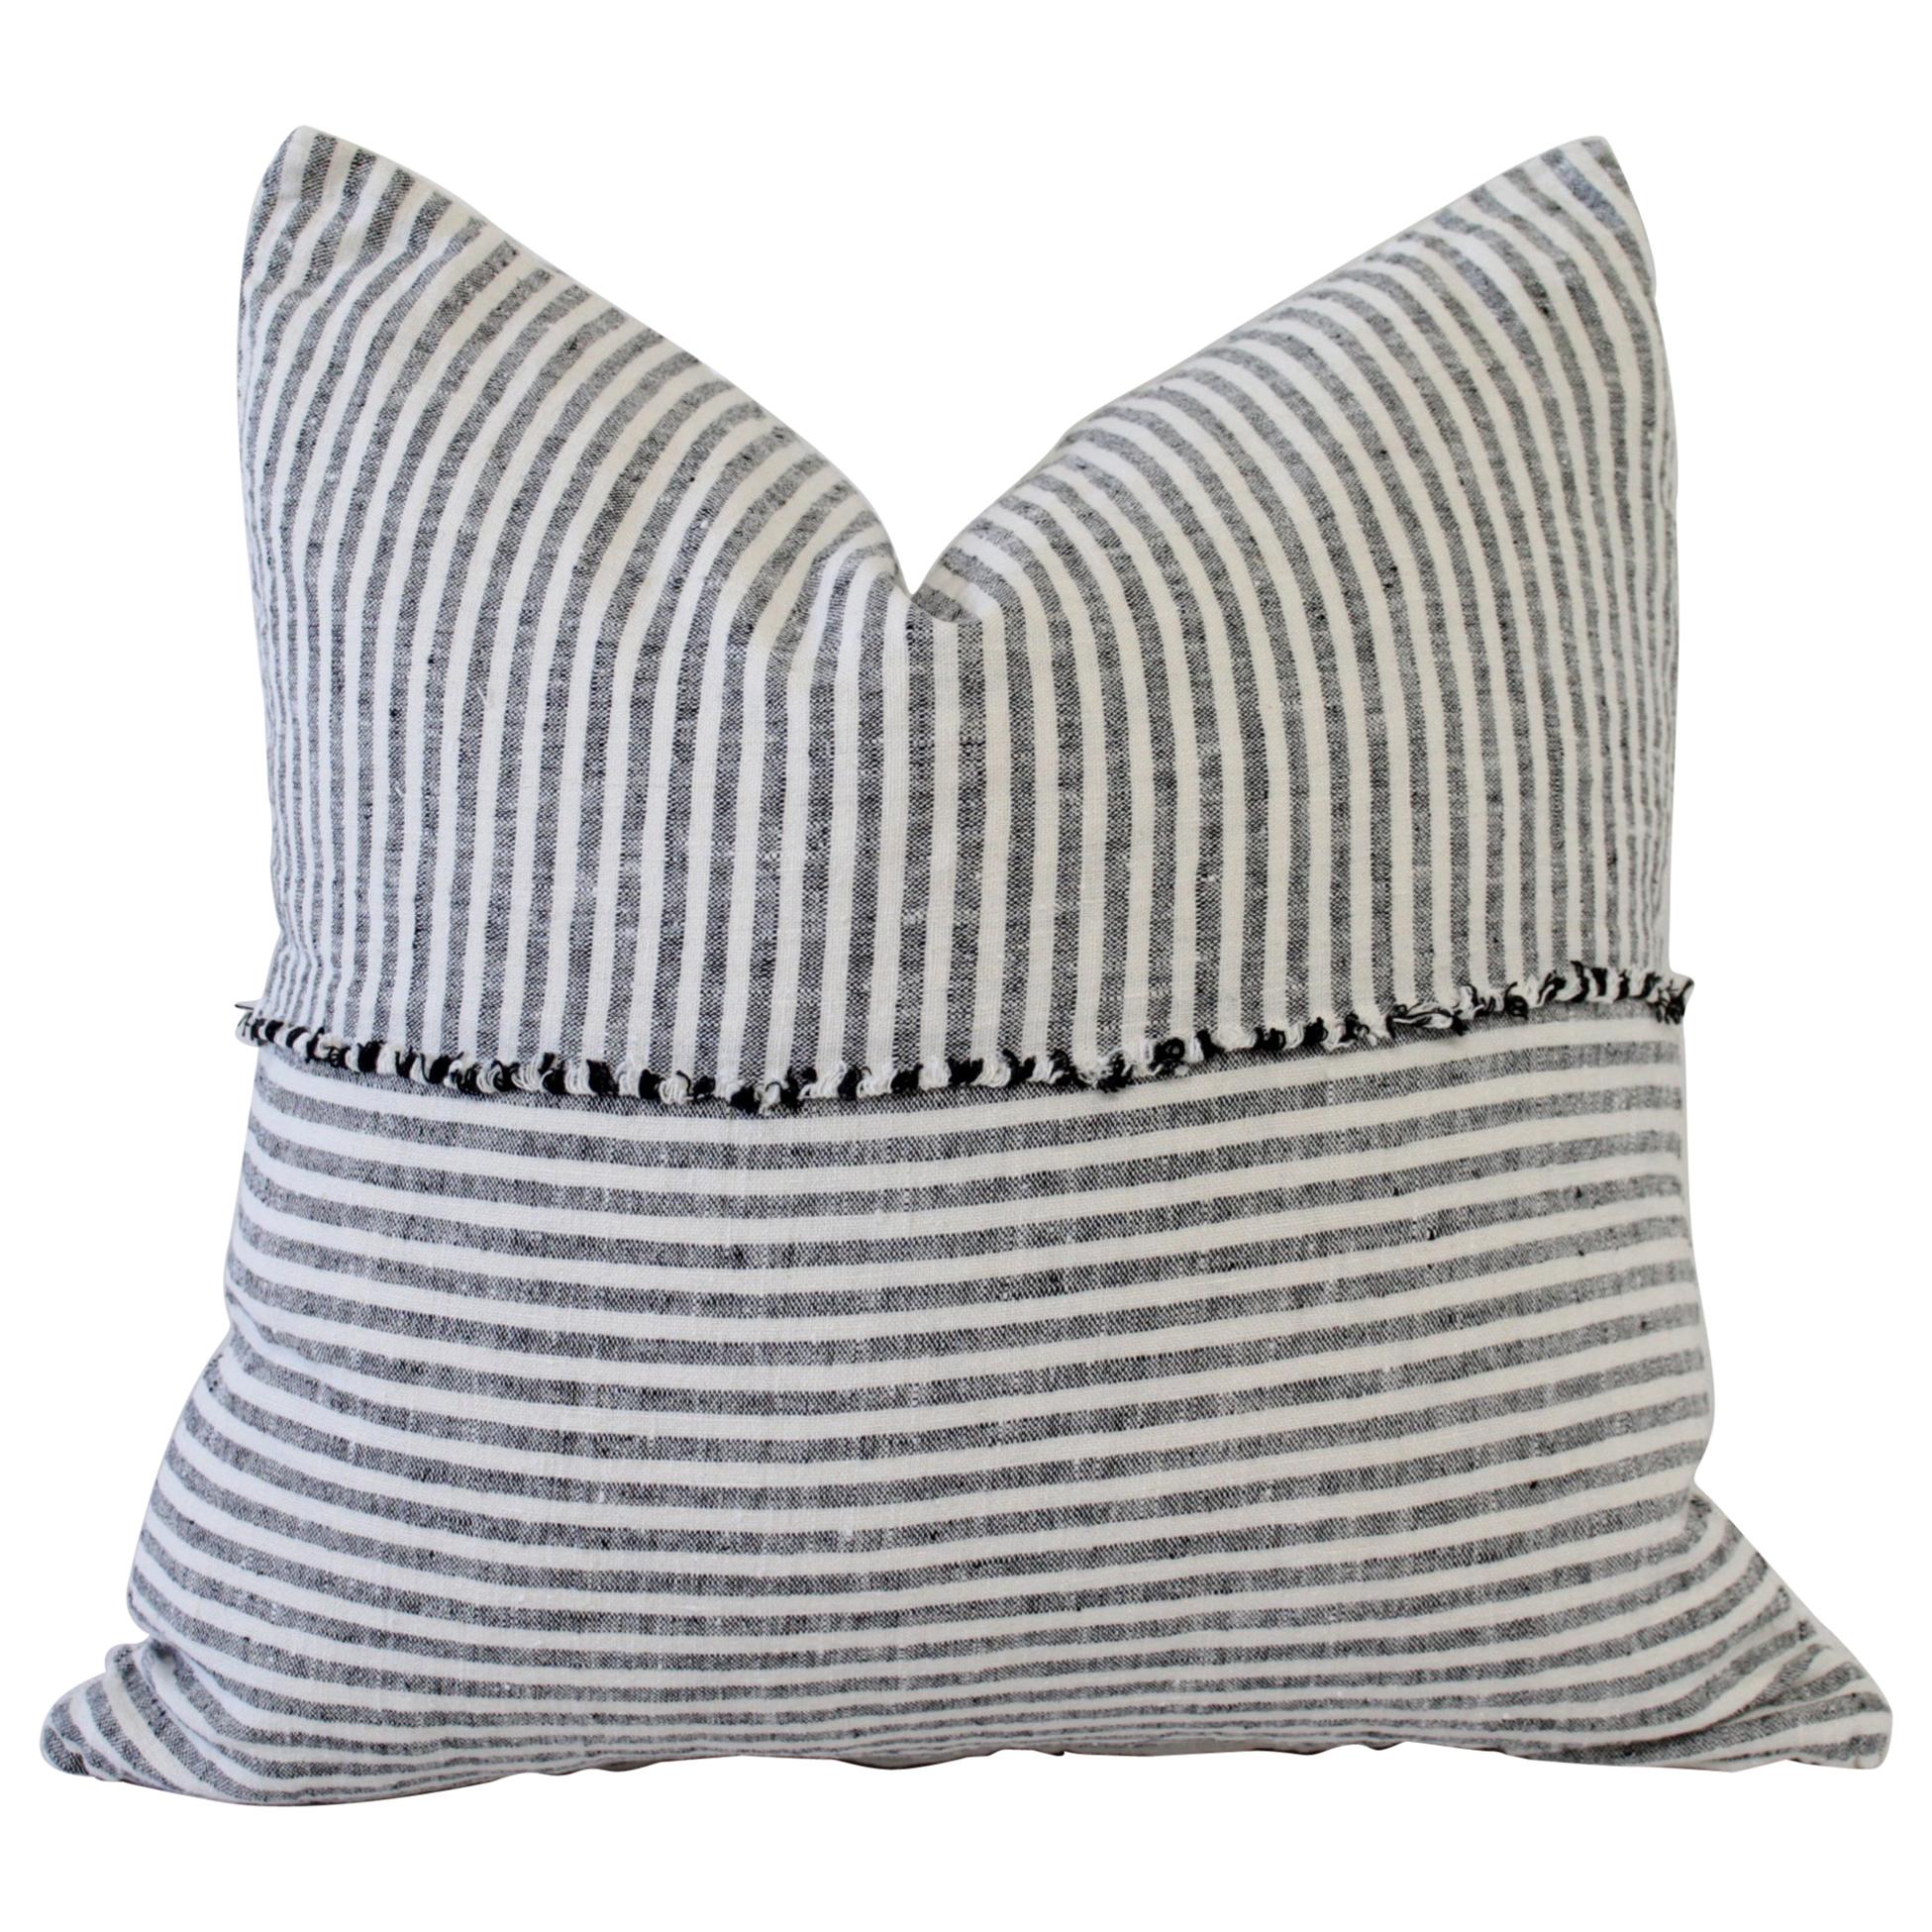 Organic Linen Accent Pillows in Black and White Ticking Stripe For Sale